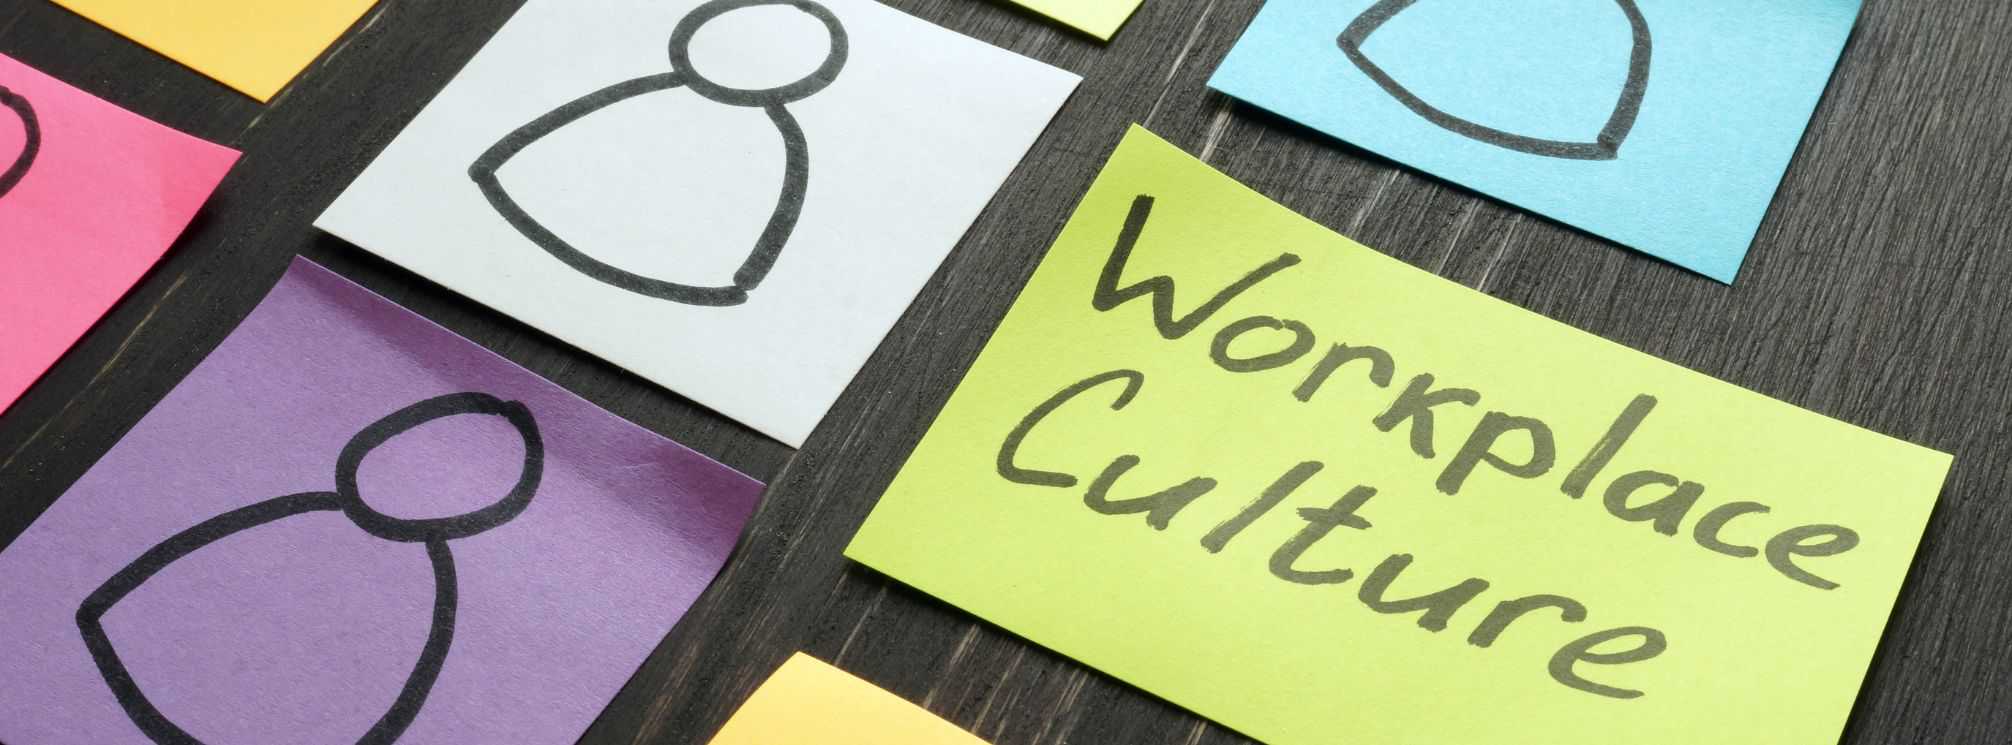 sticky note that says "workplace culture"